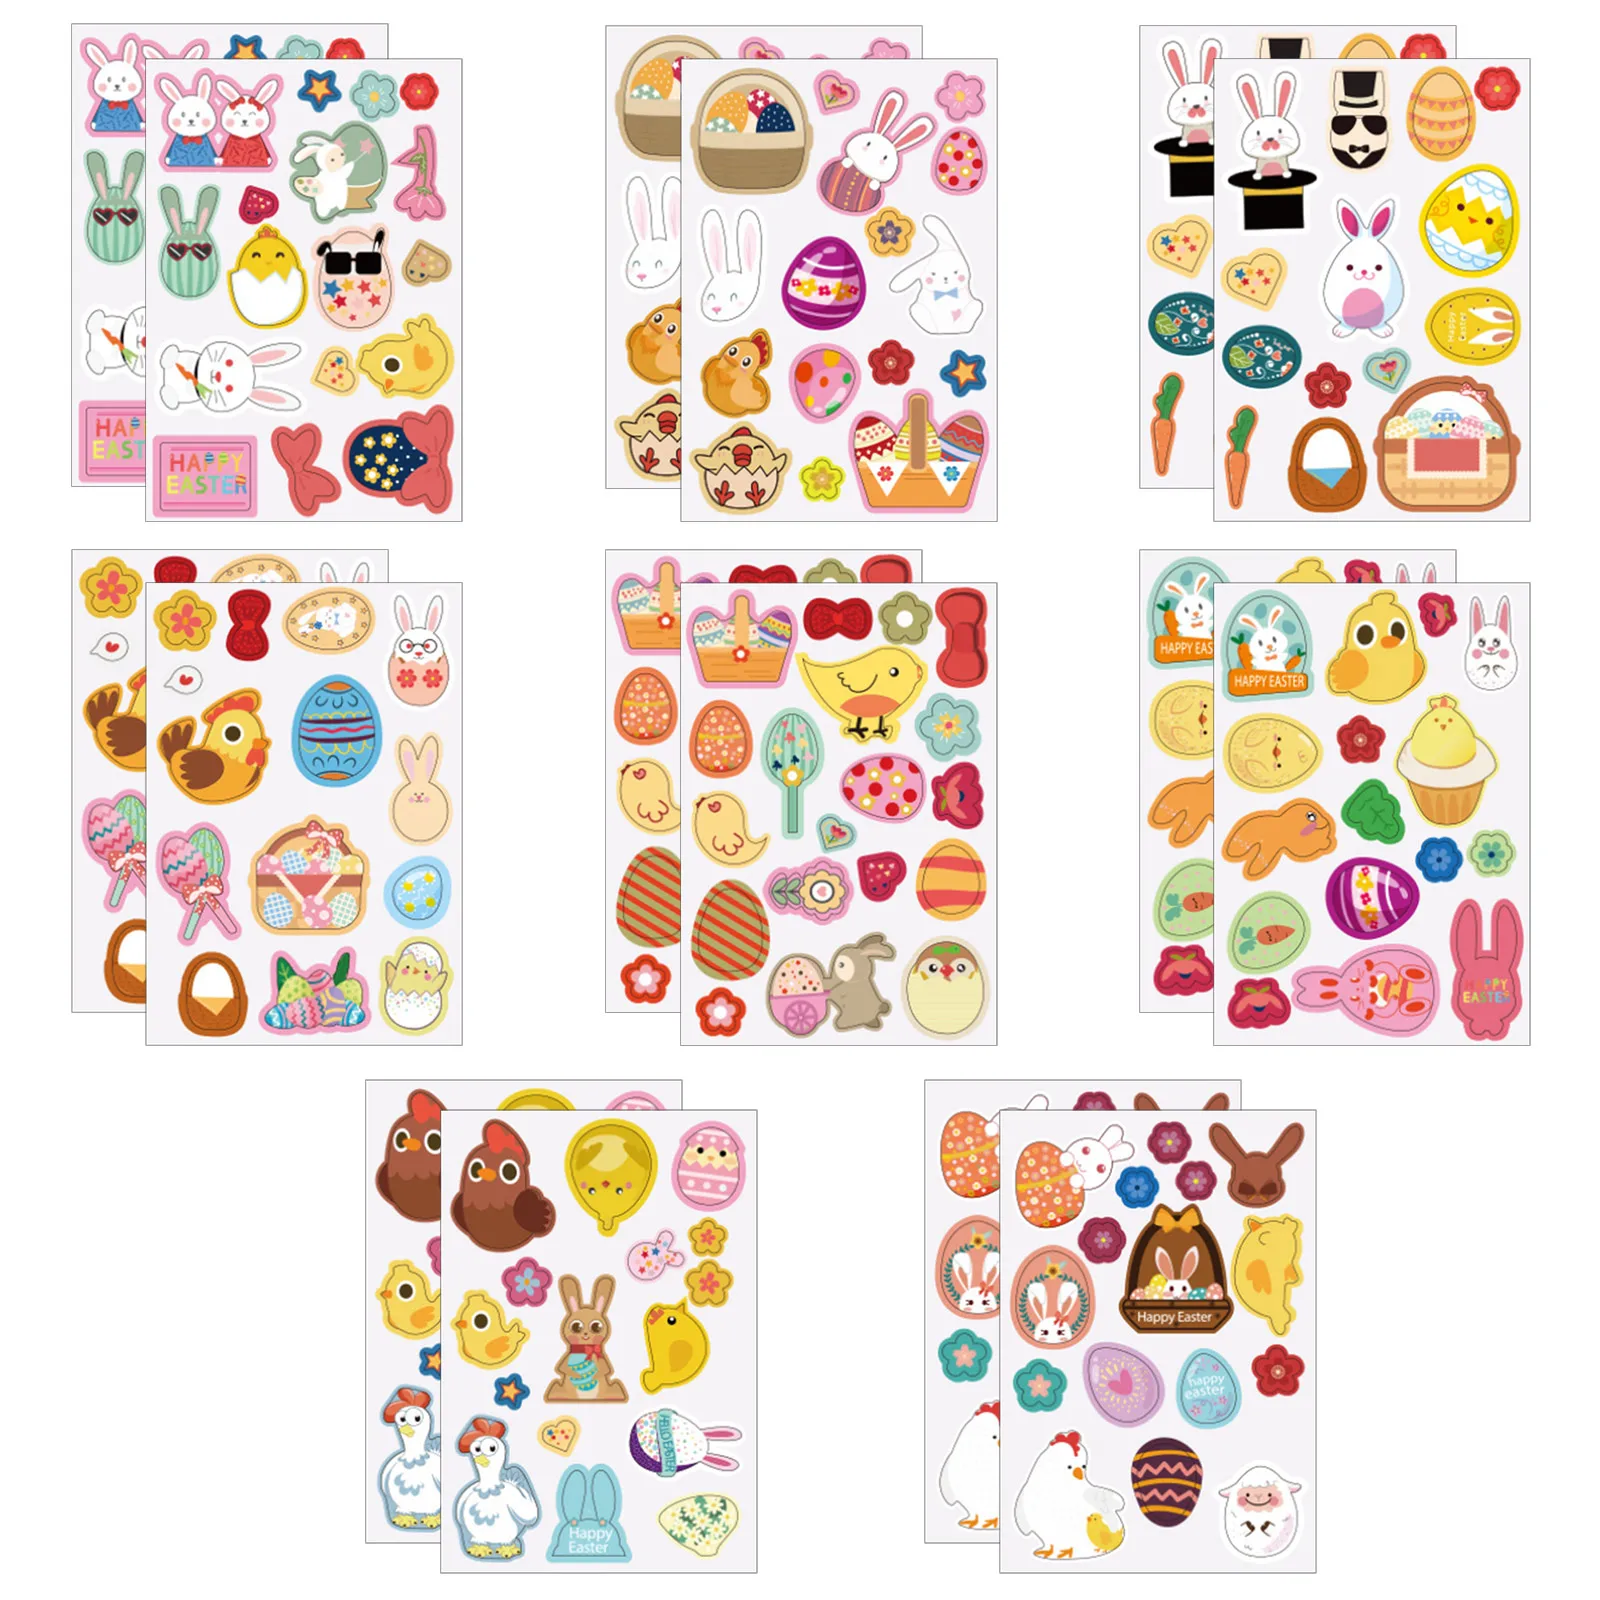 

16 Sheets Easter Stickers Bulk Cute Easter Egg Bunny Chick Style Stickers for Home Decorations Party Favor Games Supplies